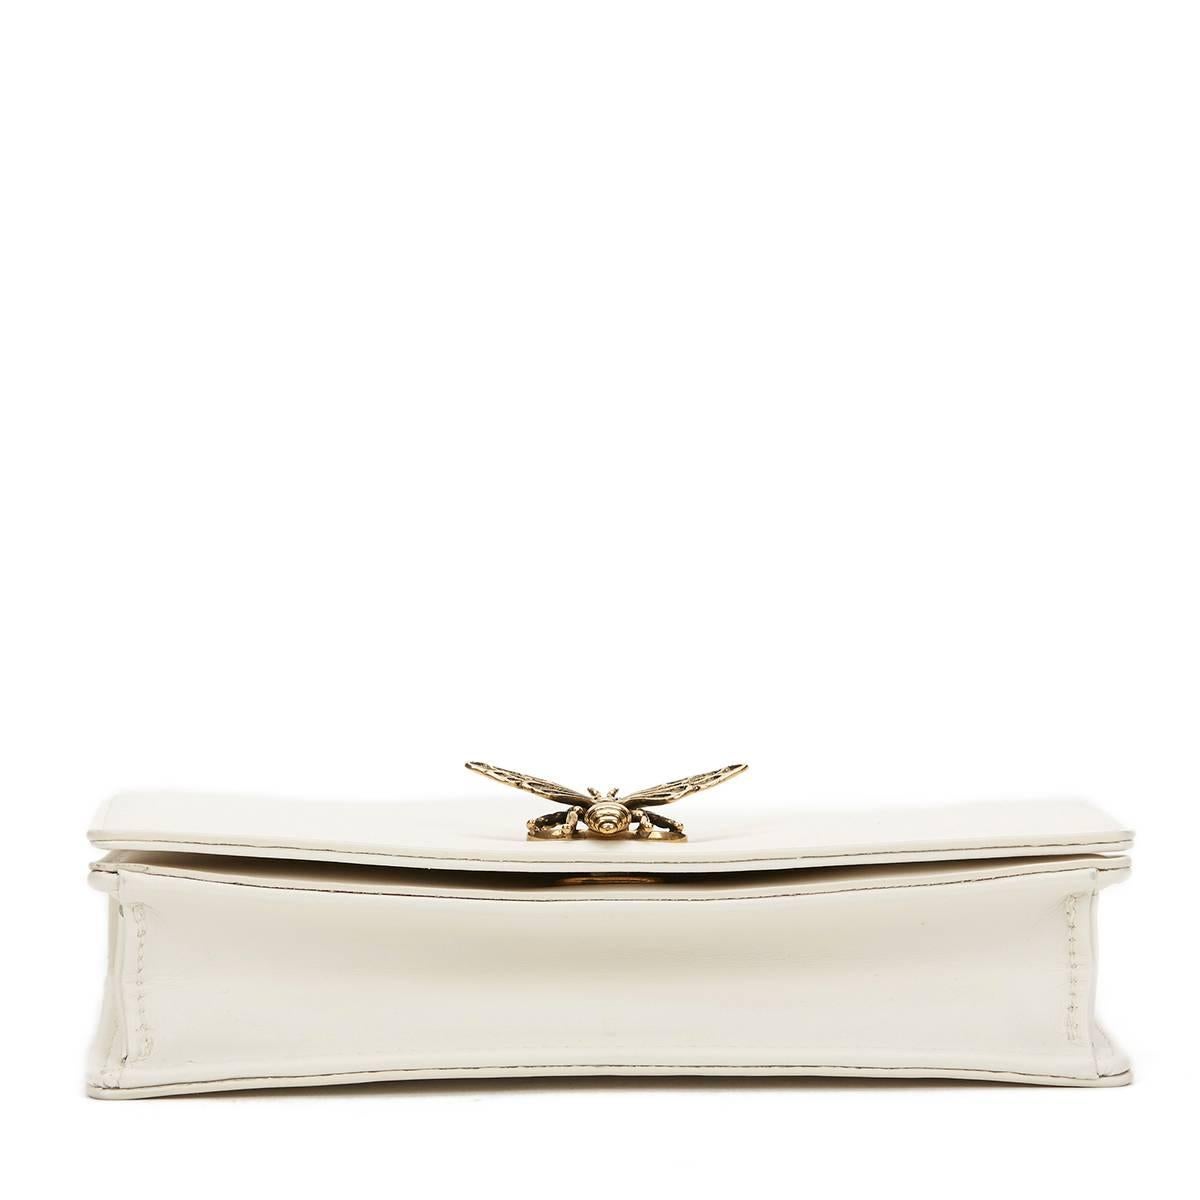 CHRISTIAN DIOR
White Calfskin Bee Pouch

This CHRISTIAN DIOR Bee Pouch is in Unworn Condition accompanied by Dior Dust Bag, Box, Care Card. Circa 2016. Primarily made from Calfskin Leather complimented by Antiqued Gold hardware. Our  reference is